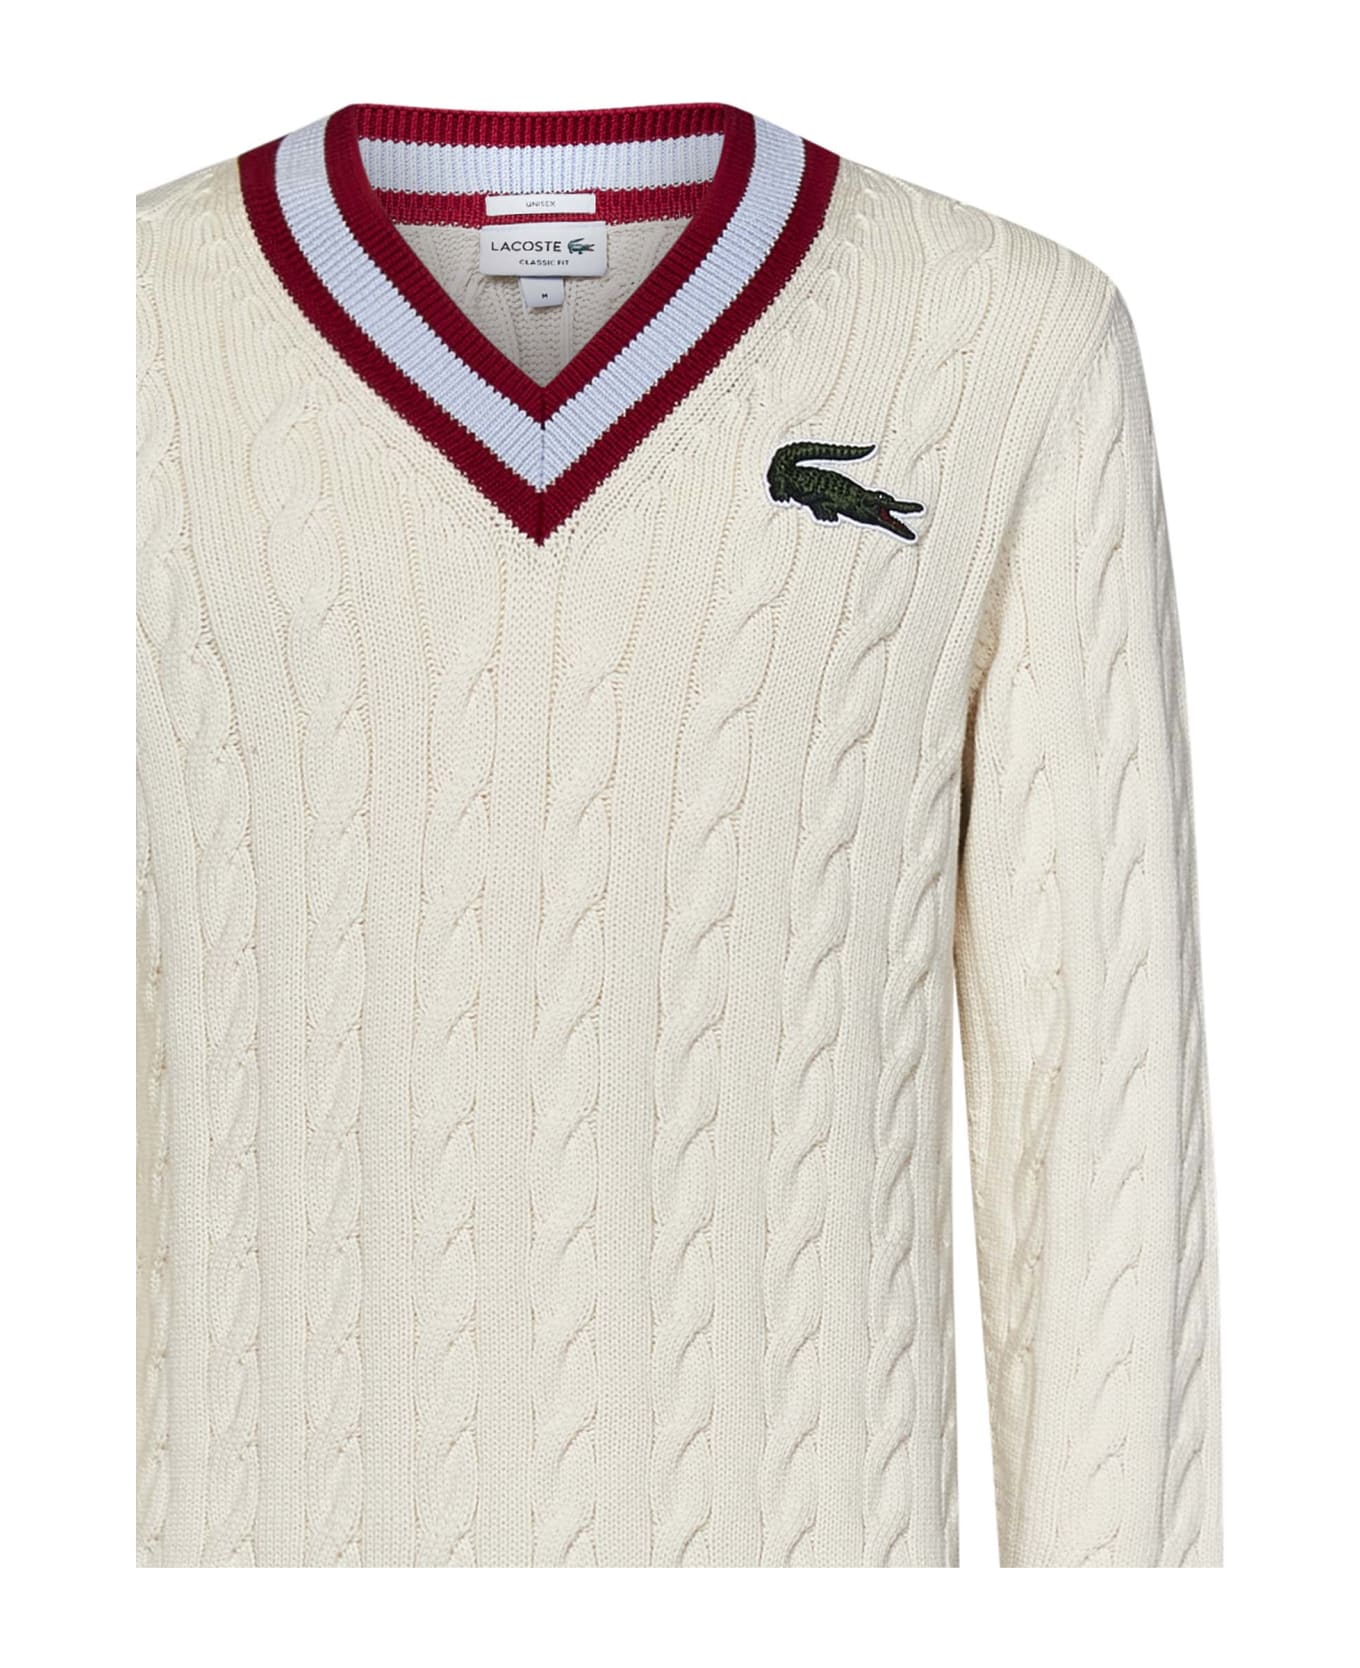 Lacoste Sweater - White name:475